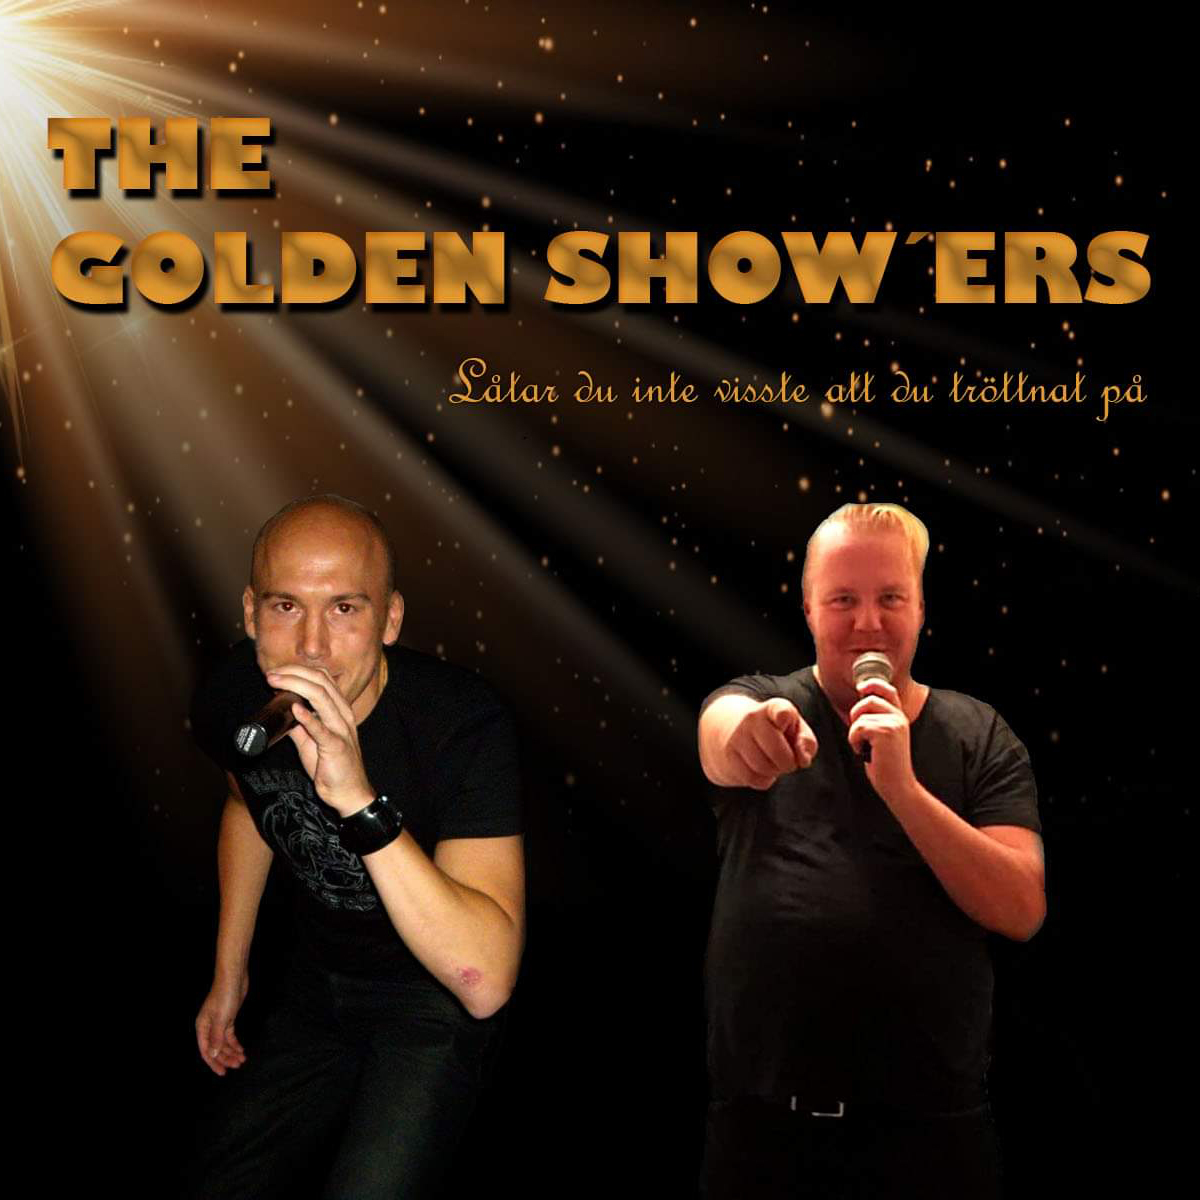 The Golden Showers